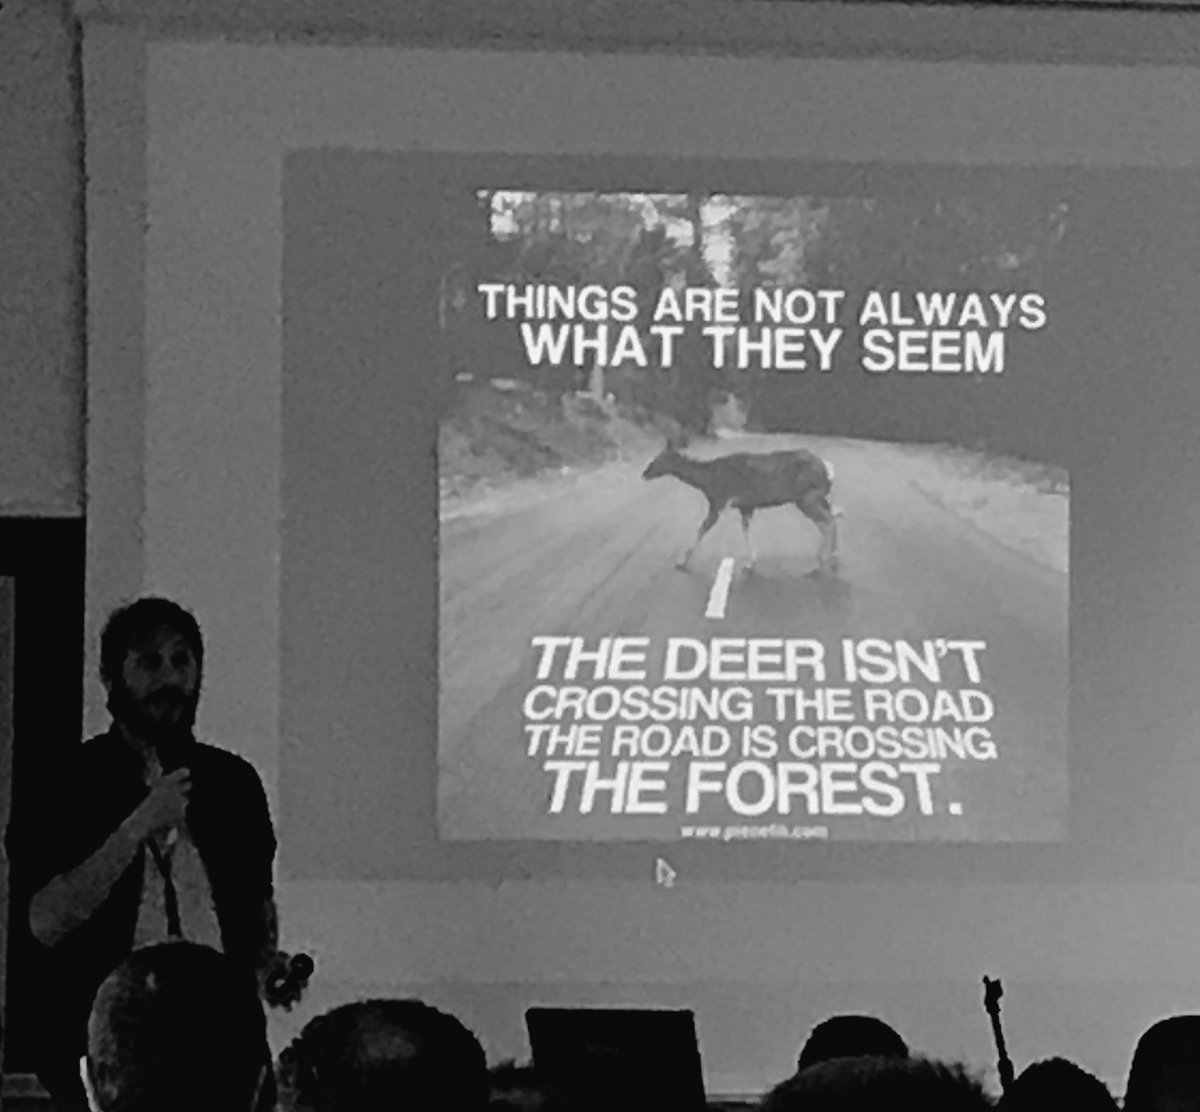 The deer isn’t crossing the road.
The road is crossing the forest. #iad18 #agileday #pointofview